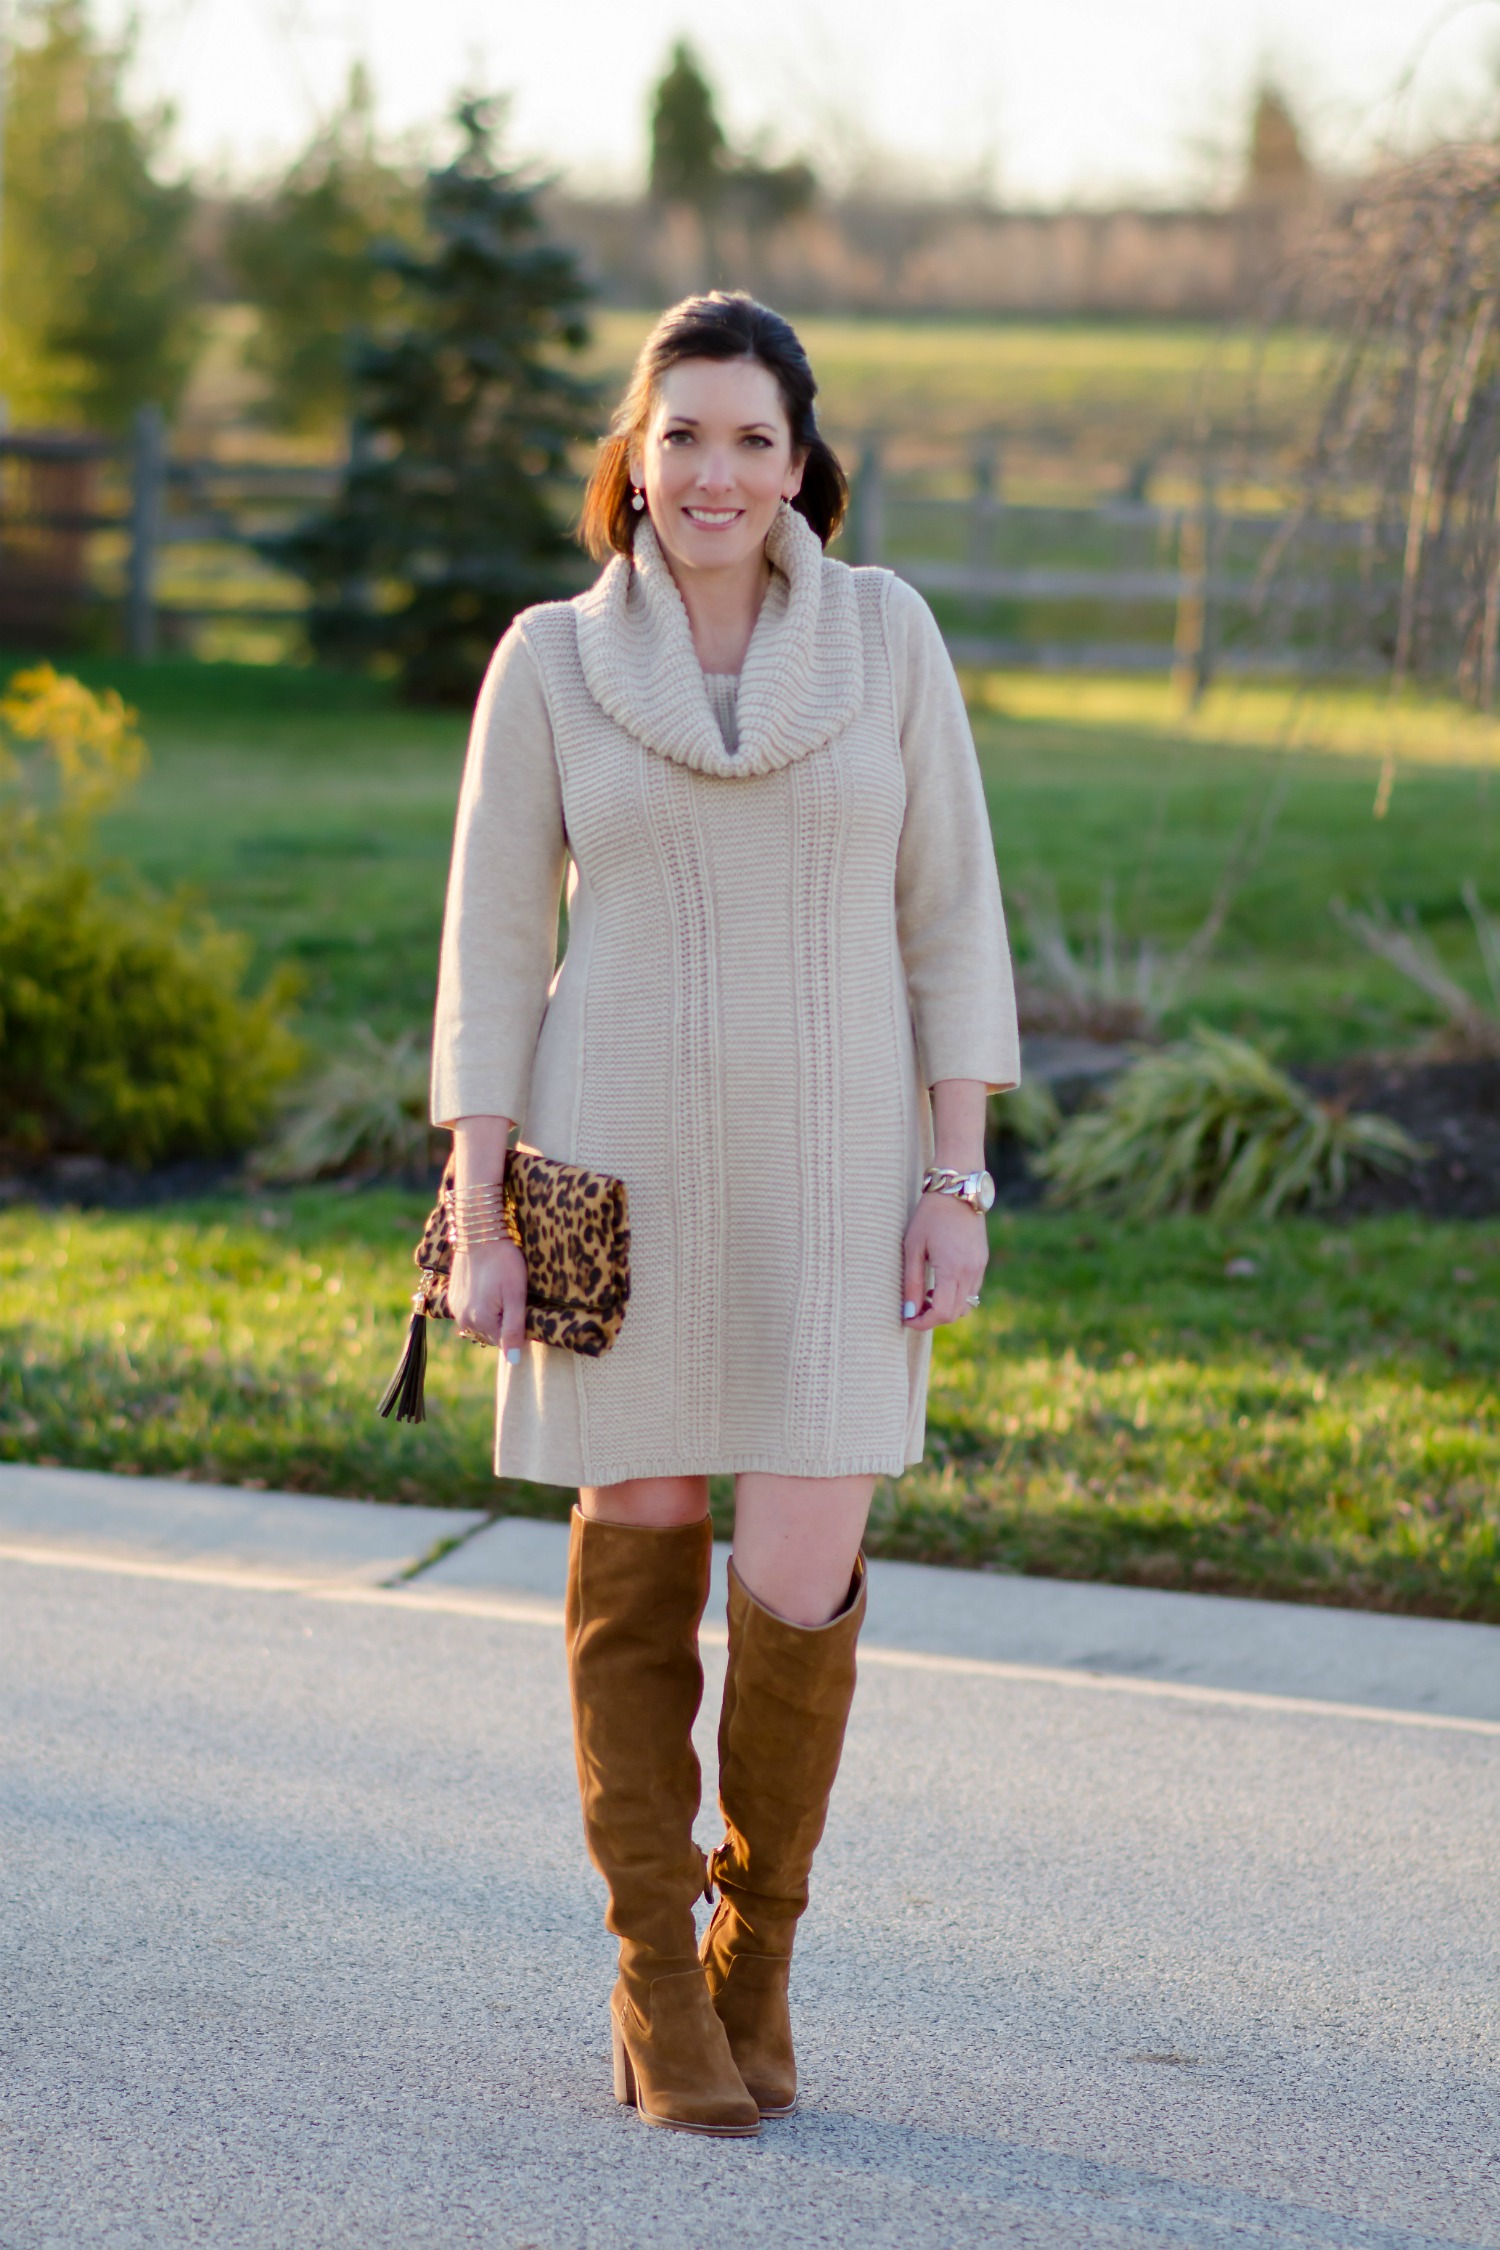 How to Wear a Sweater Dress, OTK Boots, over the knee boots, Dolce Vita Ohanna, Vince Camuto sweater dress, Jo-Lynne Shane, leopard clutch, Sole Society, Nordstrom, fashion blog, fashion over 40, cowl neck sweater dress, holiday outfit ideas, winter outfit ideas, Jo-Lynne Shane blog, Philadelphia mom blog, mom fashion